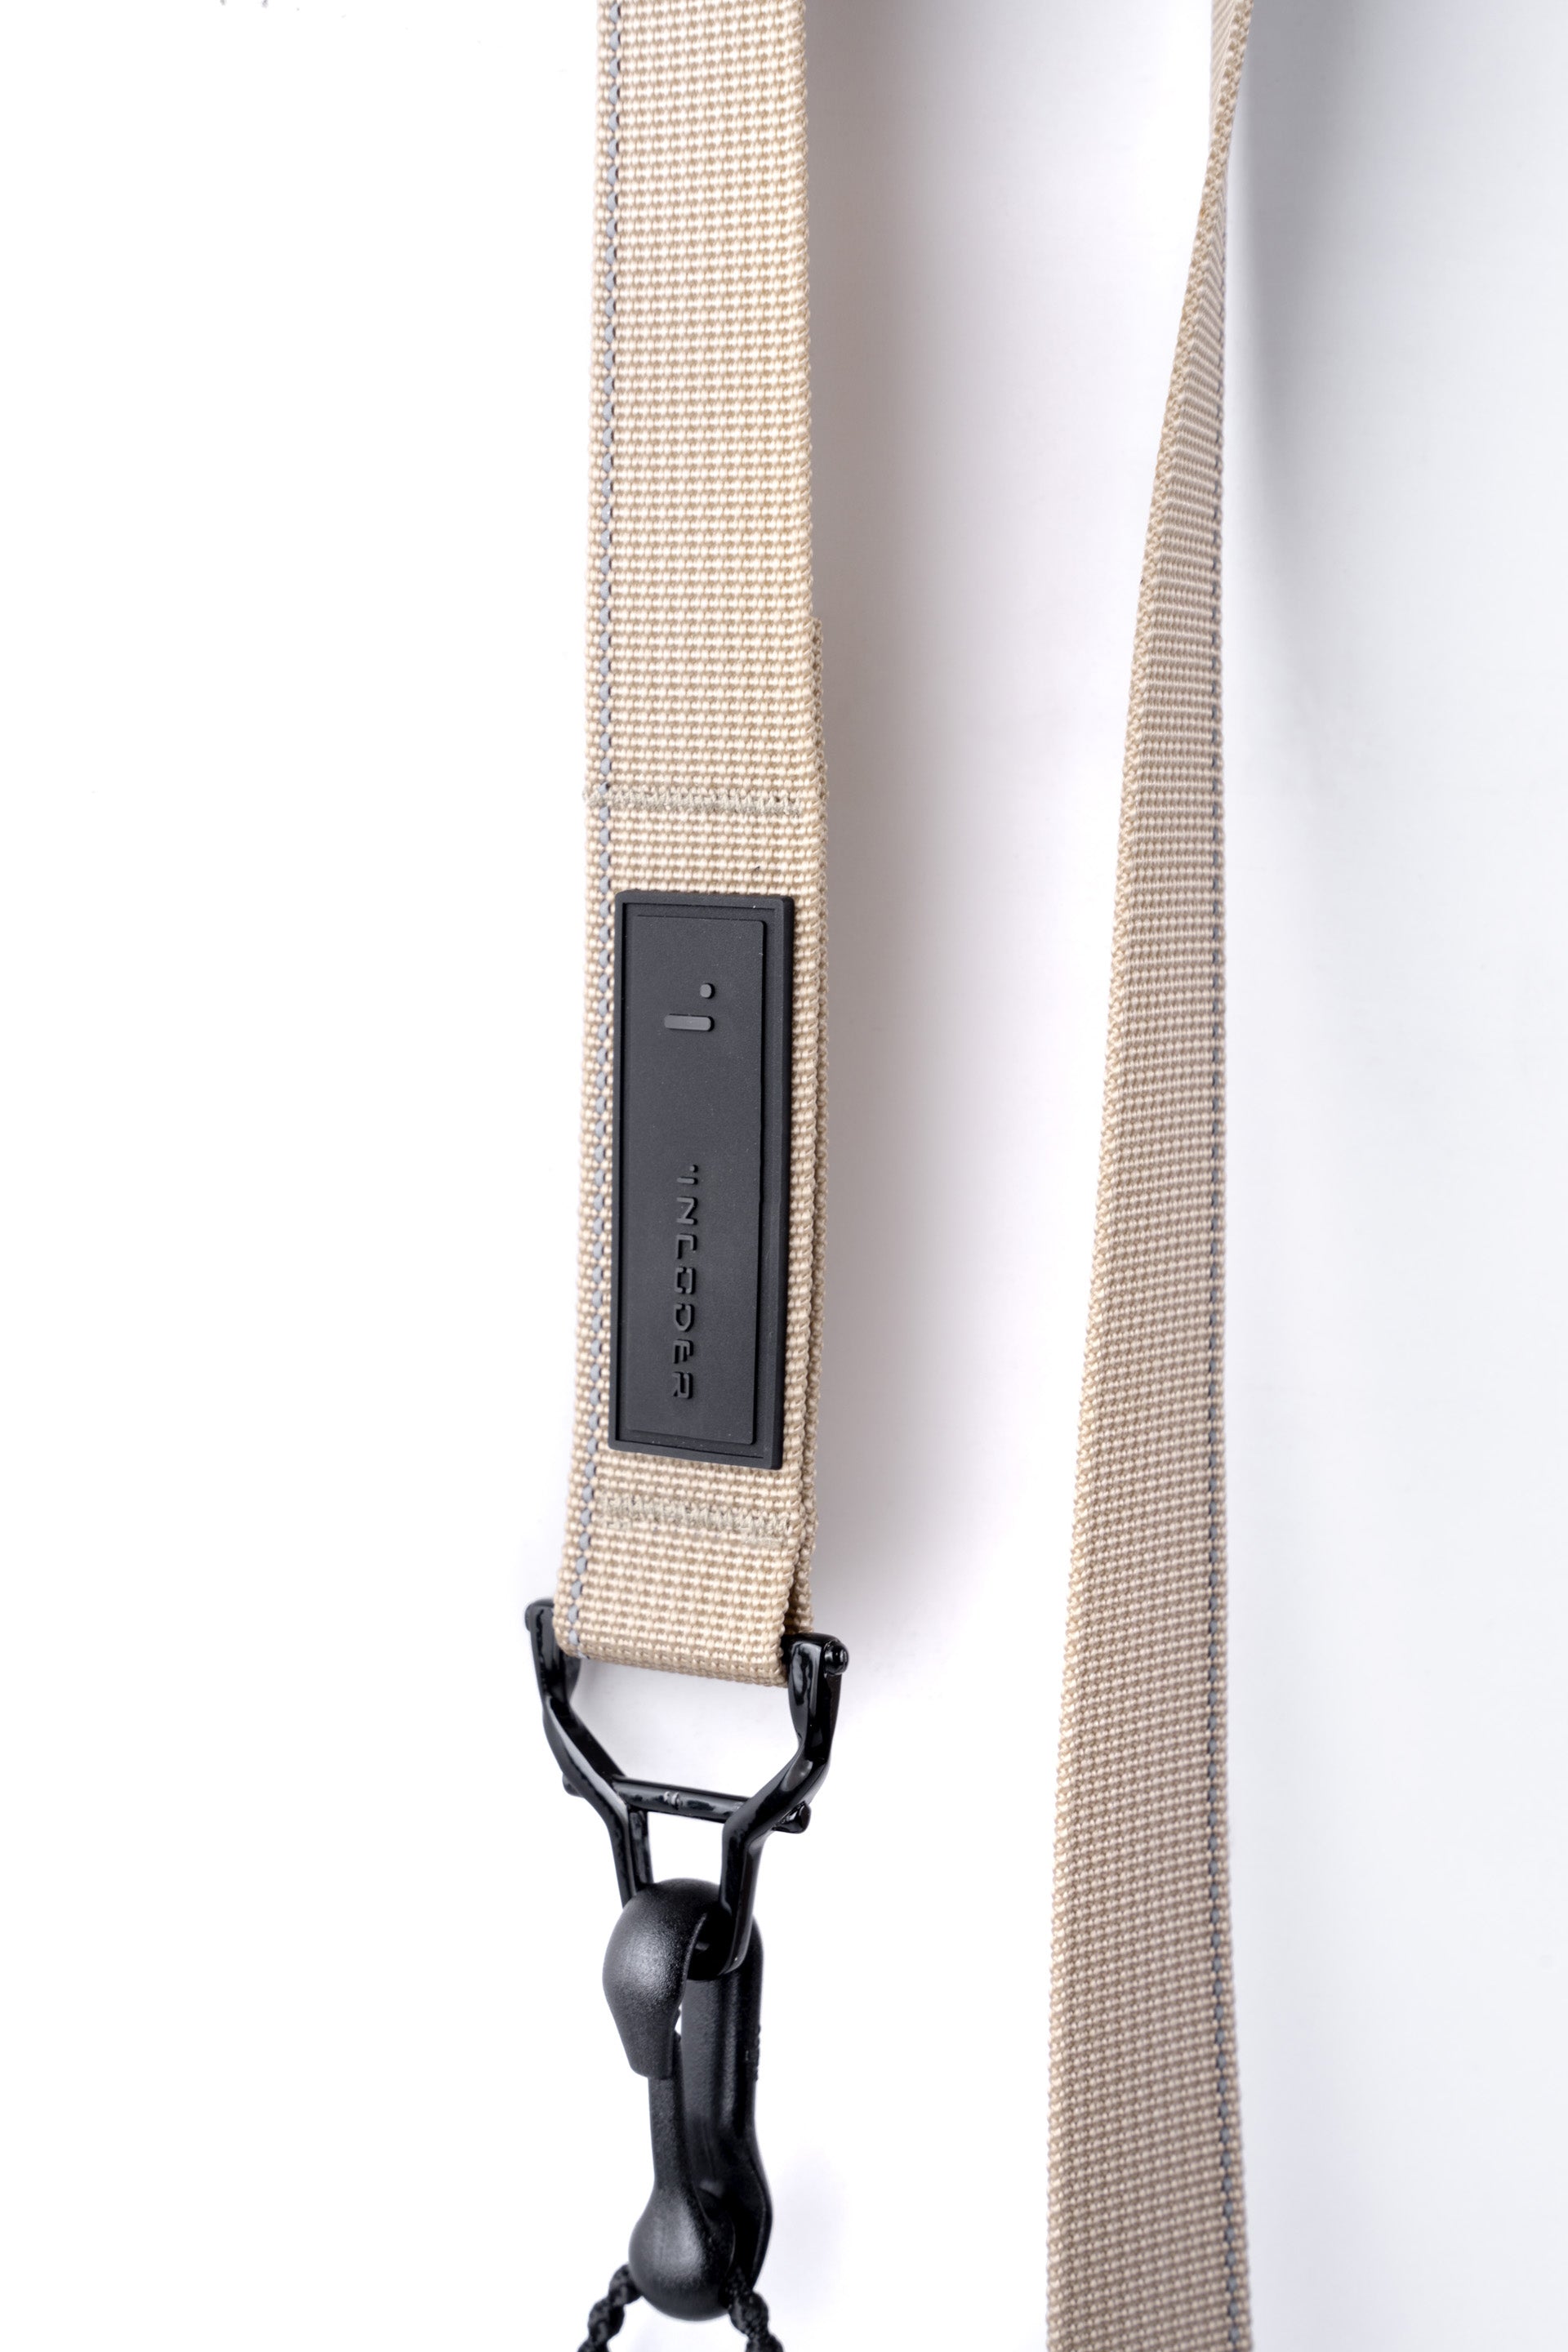 iN Wide Strap+Strap Adapter